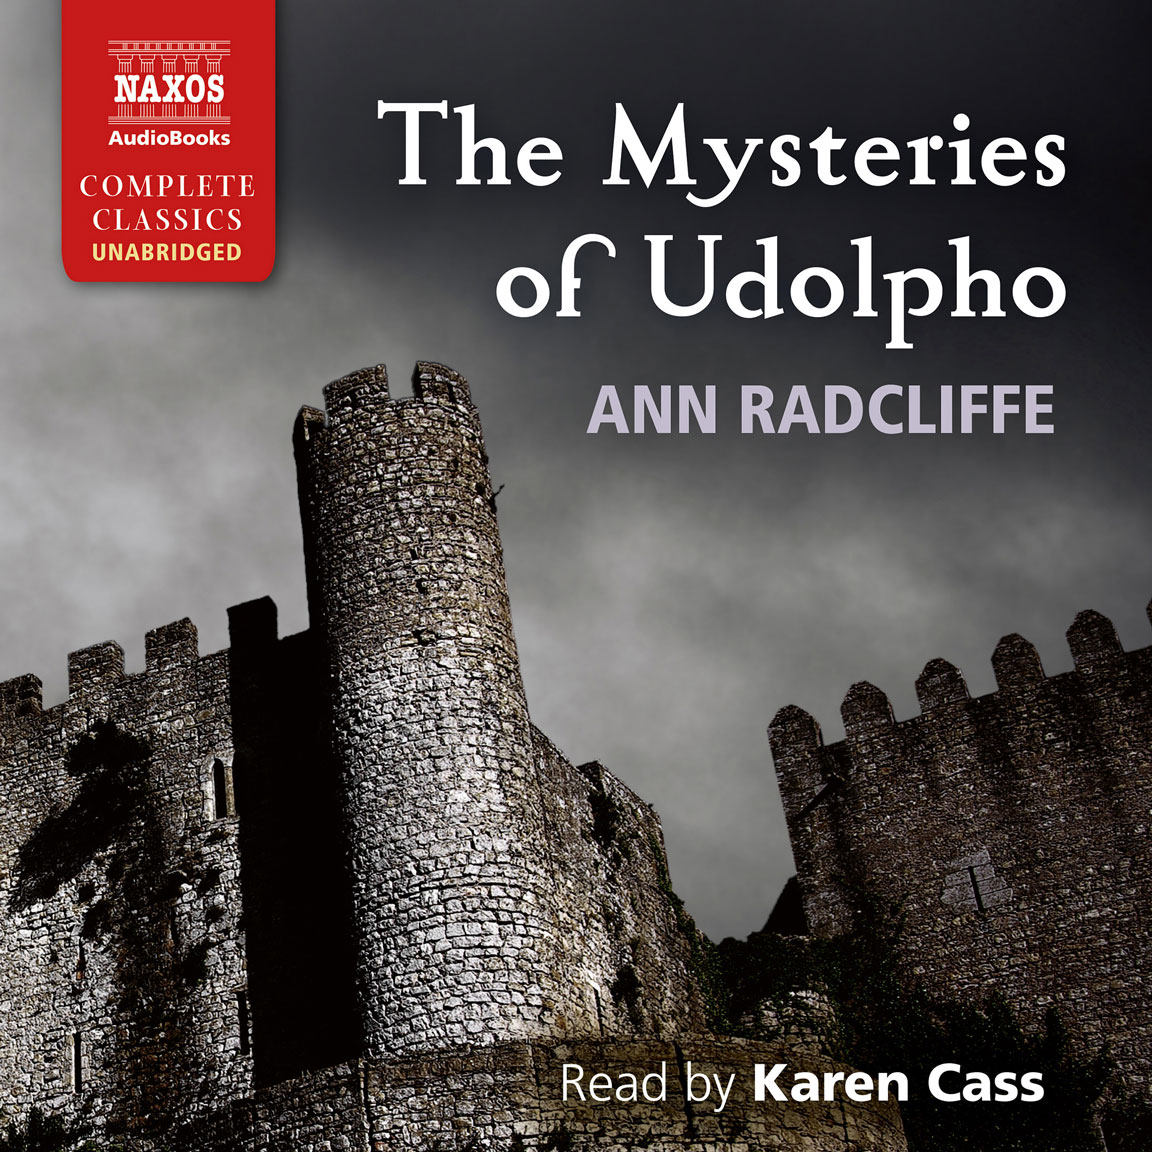 The Mysteries of Udolpho (unabridged)